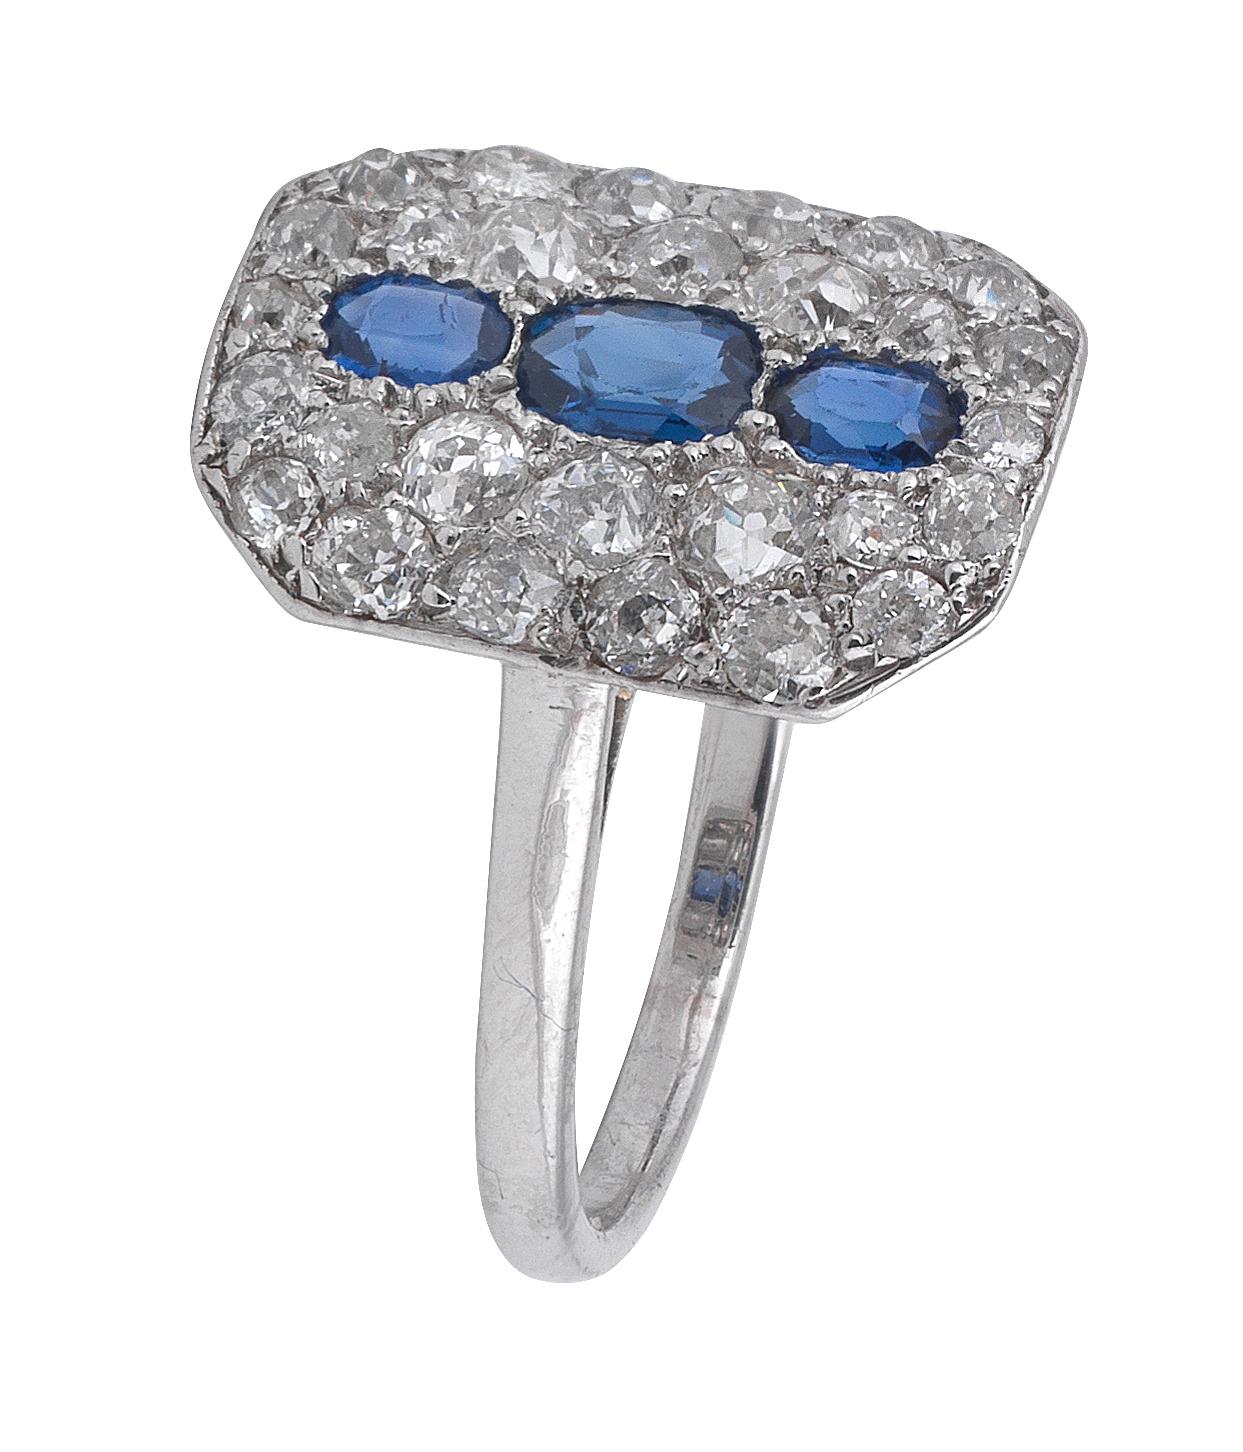 The central row of cushion cut sapphires within old brilliant-cut diamond surround, Mounted in Platinum, diamonds approx. 1.15ct. total, ring size 7